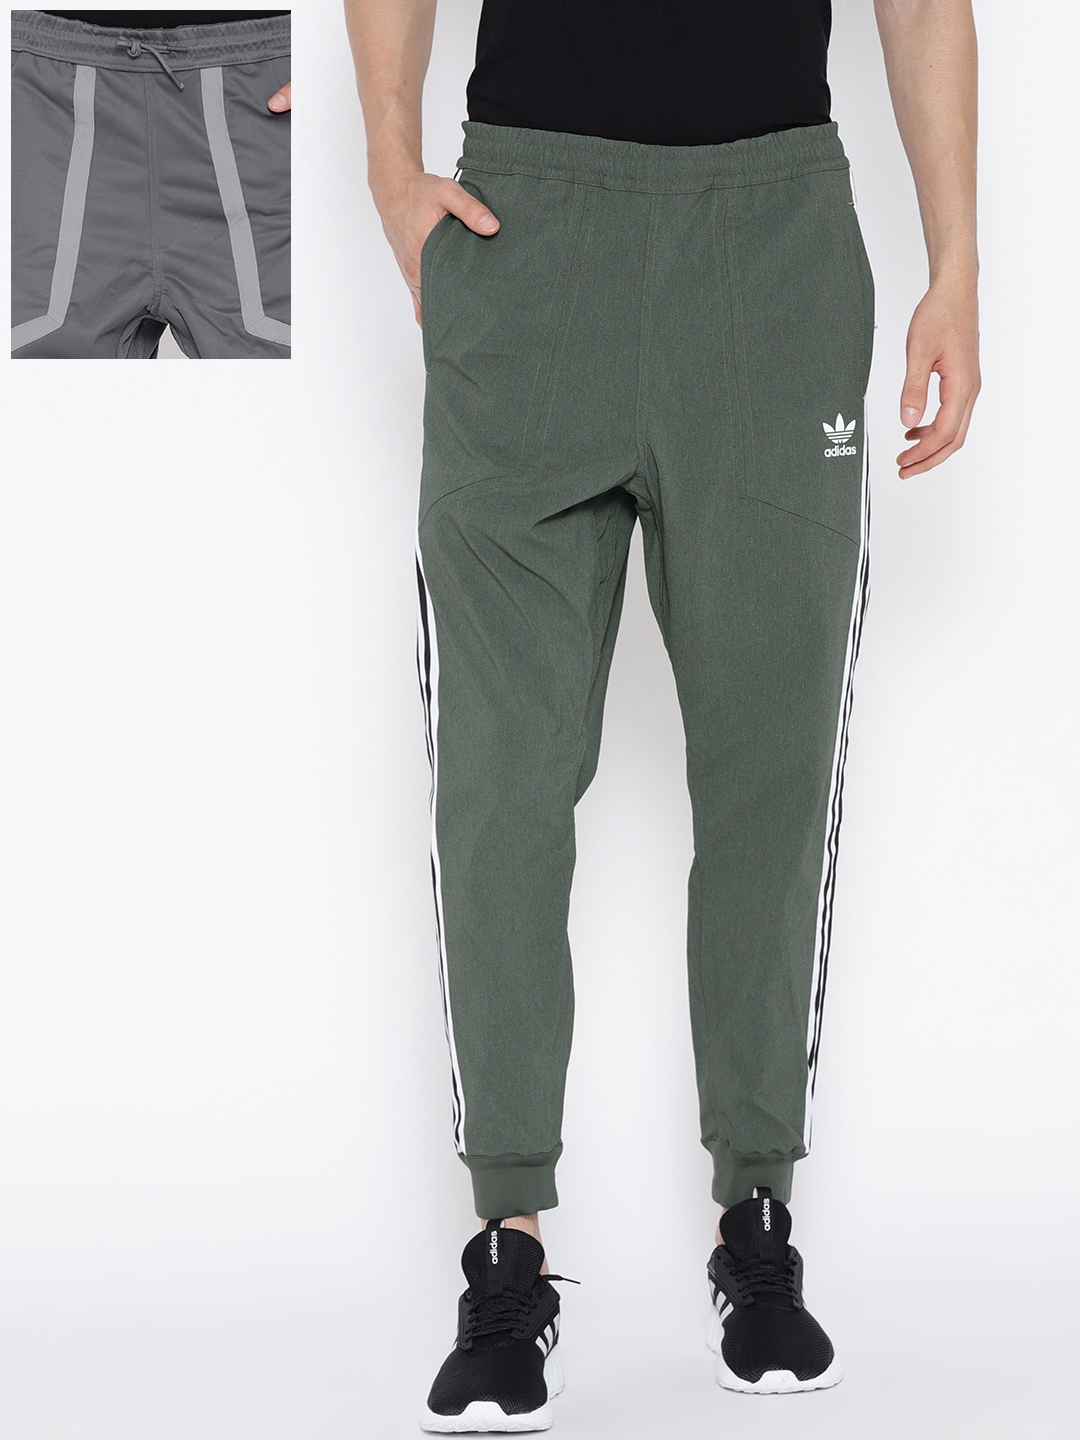 S M L Xl 2xl Olive Cargo Mens Adidas Training Cool 365 Woven Pants